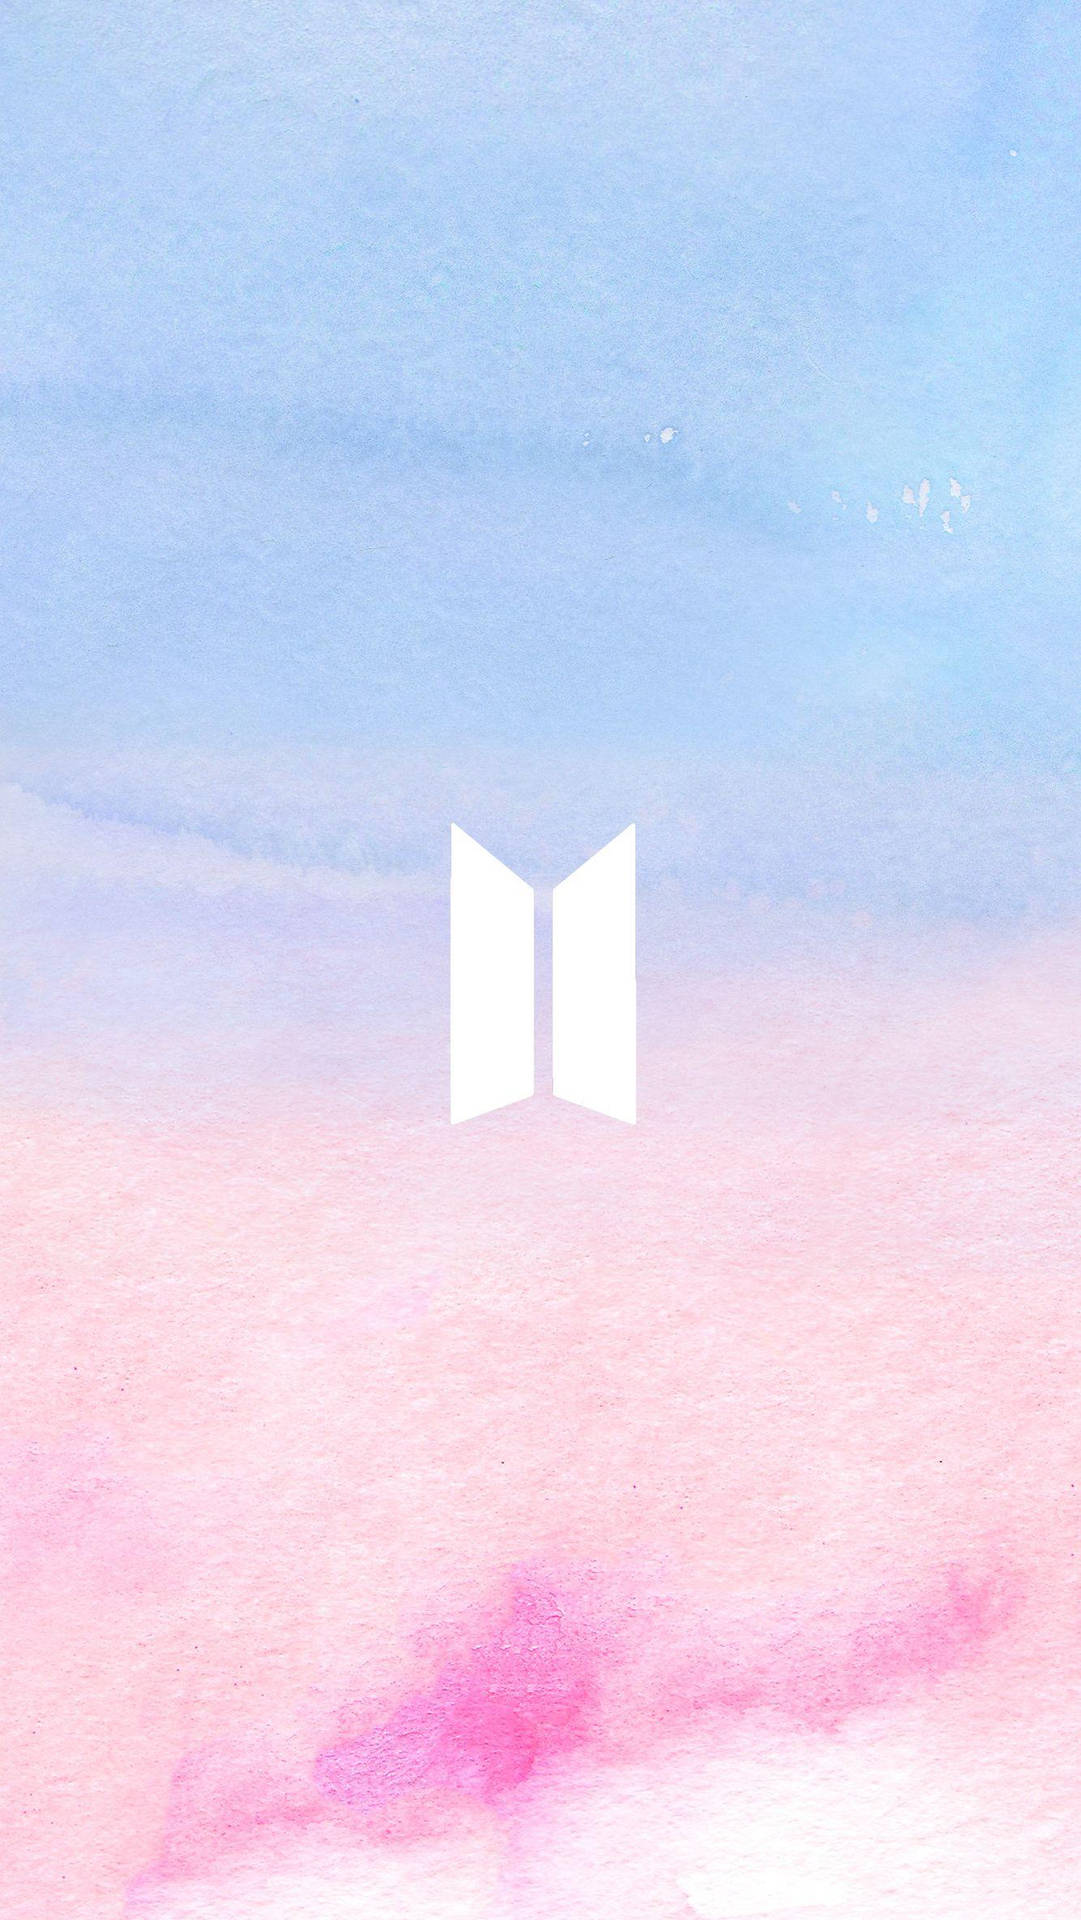 Bts Logo In Pastel Picture